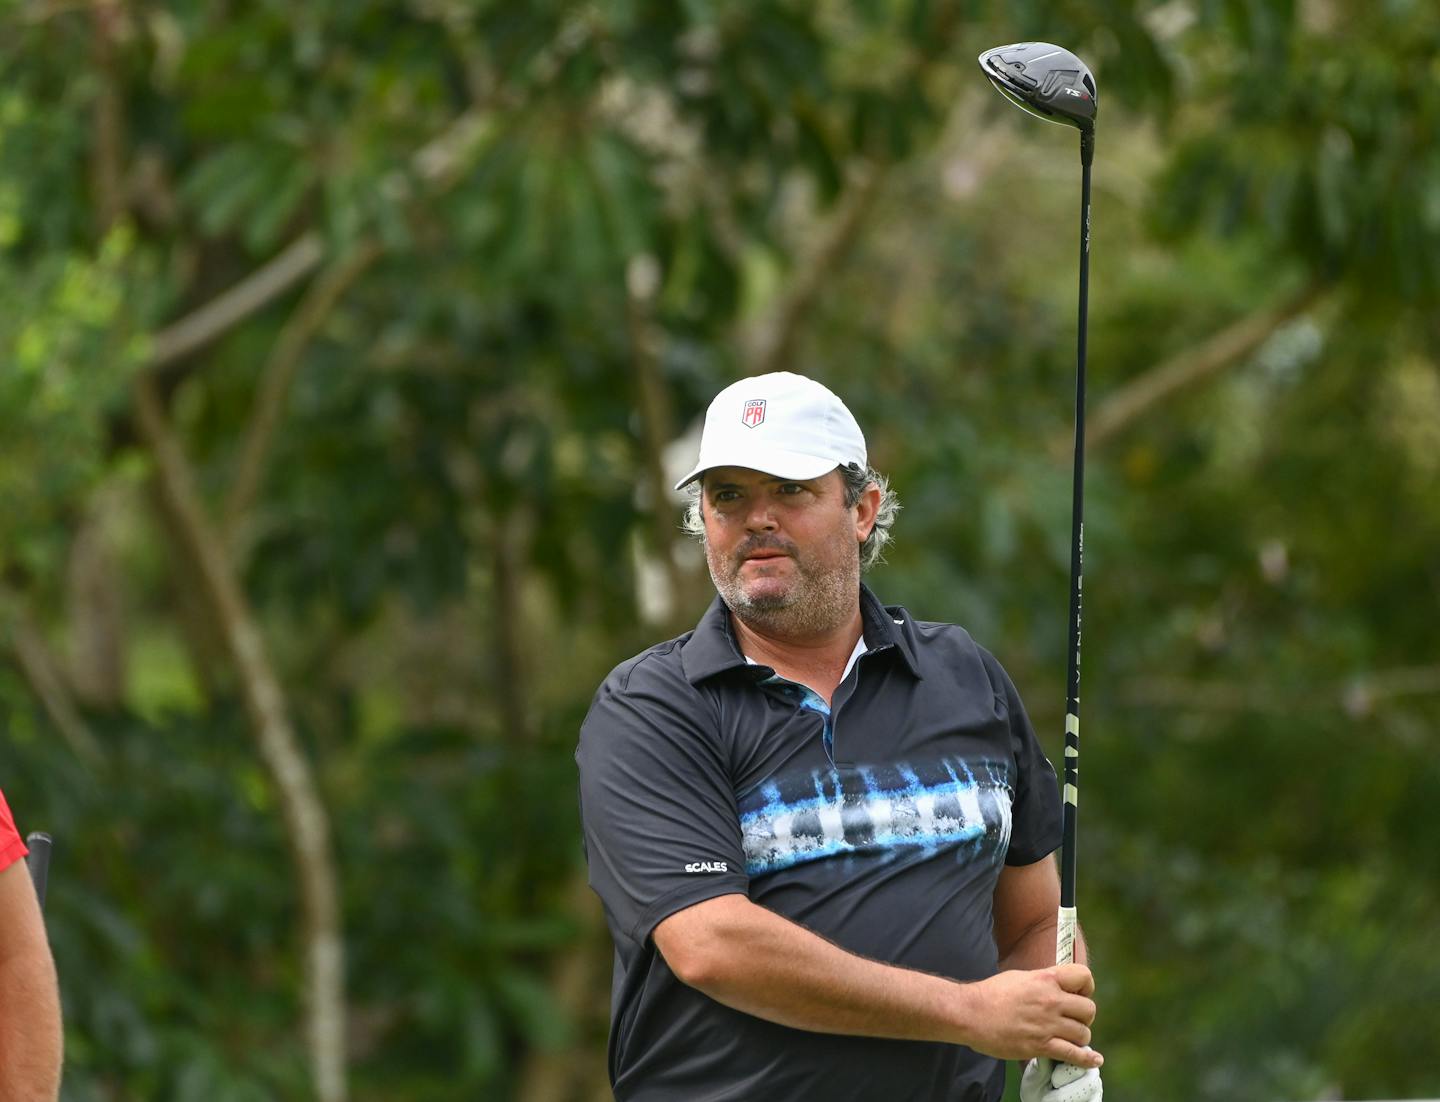 La Romana, DOMINICAN REPUBLIC: Jeronimo Esteve of Puerto Rico pictured at the 2022 Latin America Amateur Championship at Casa de Campo Resort during Final Round on January 23rd, 2022.